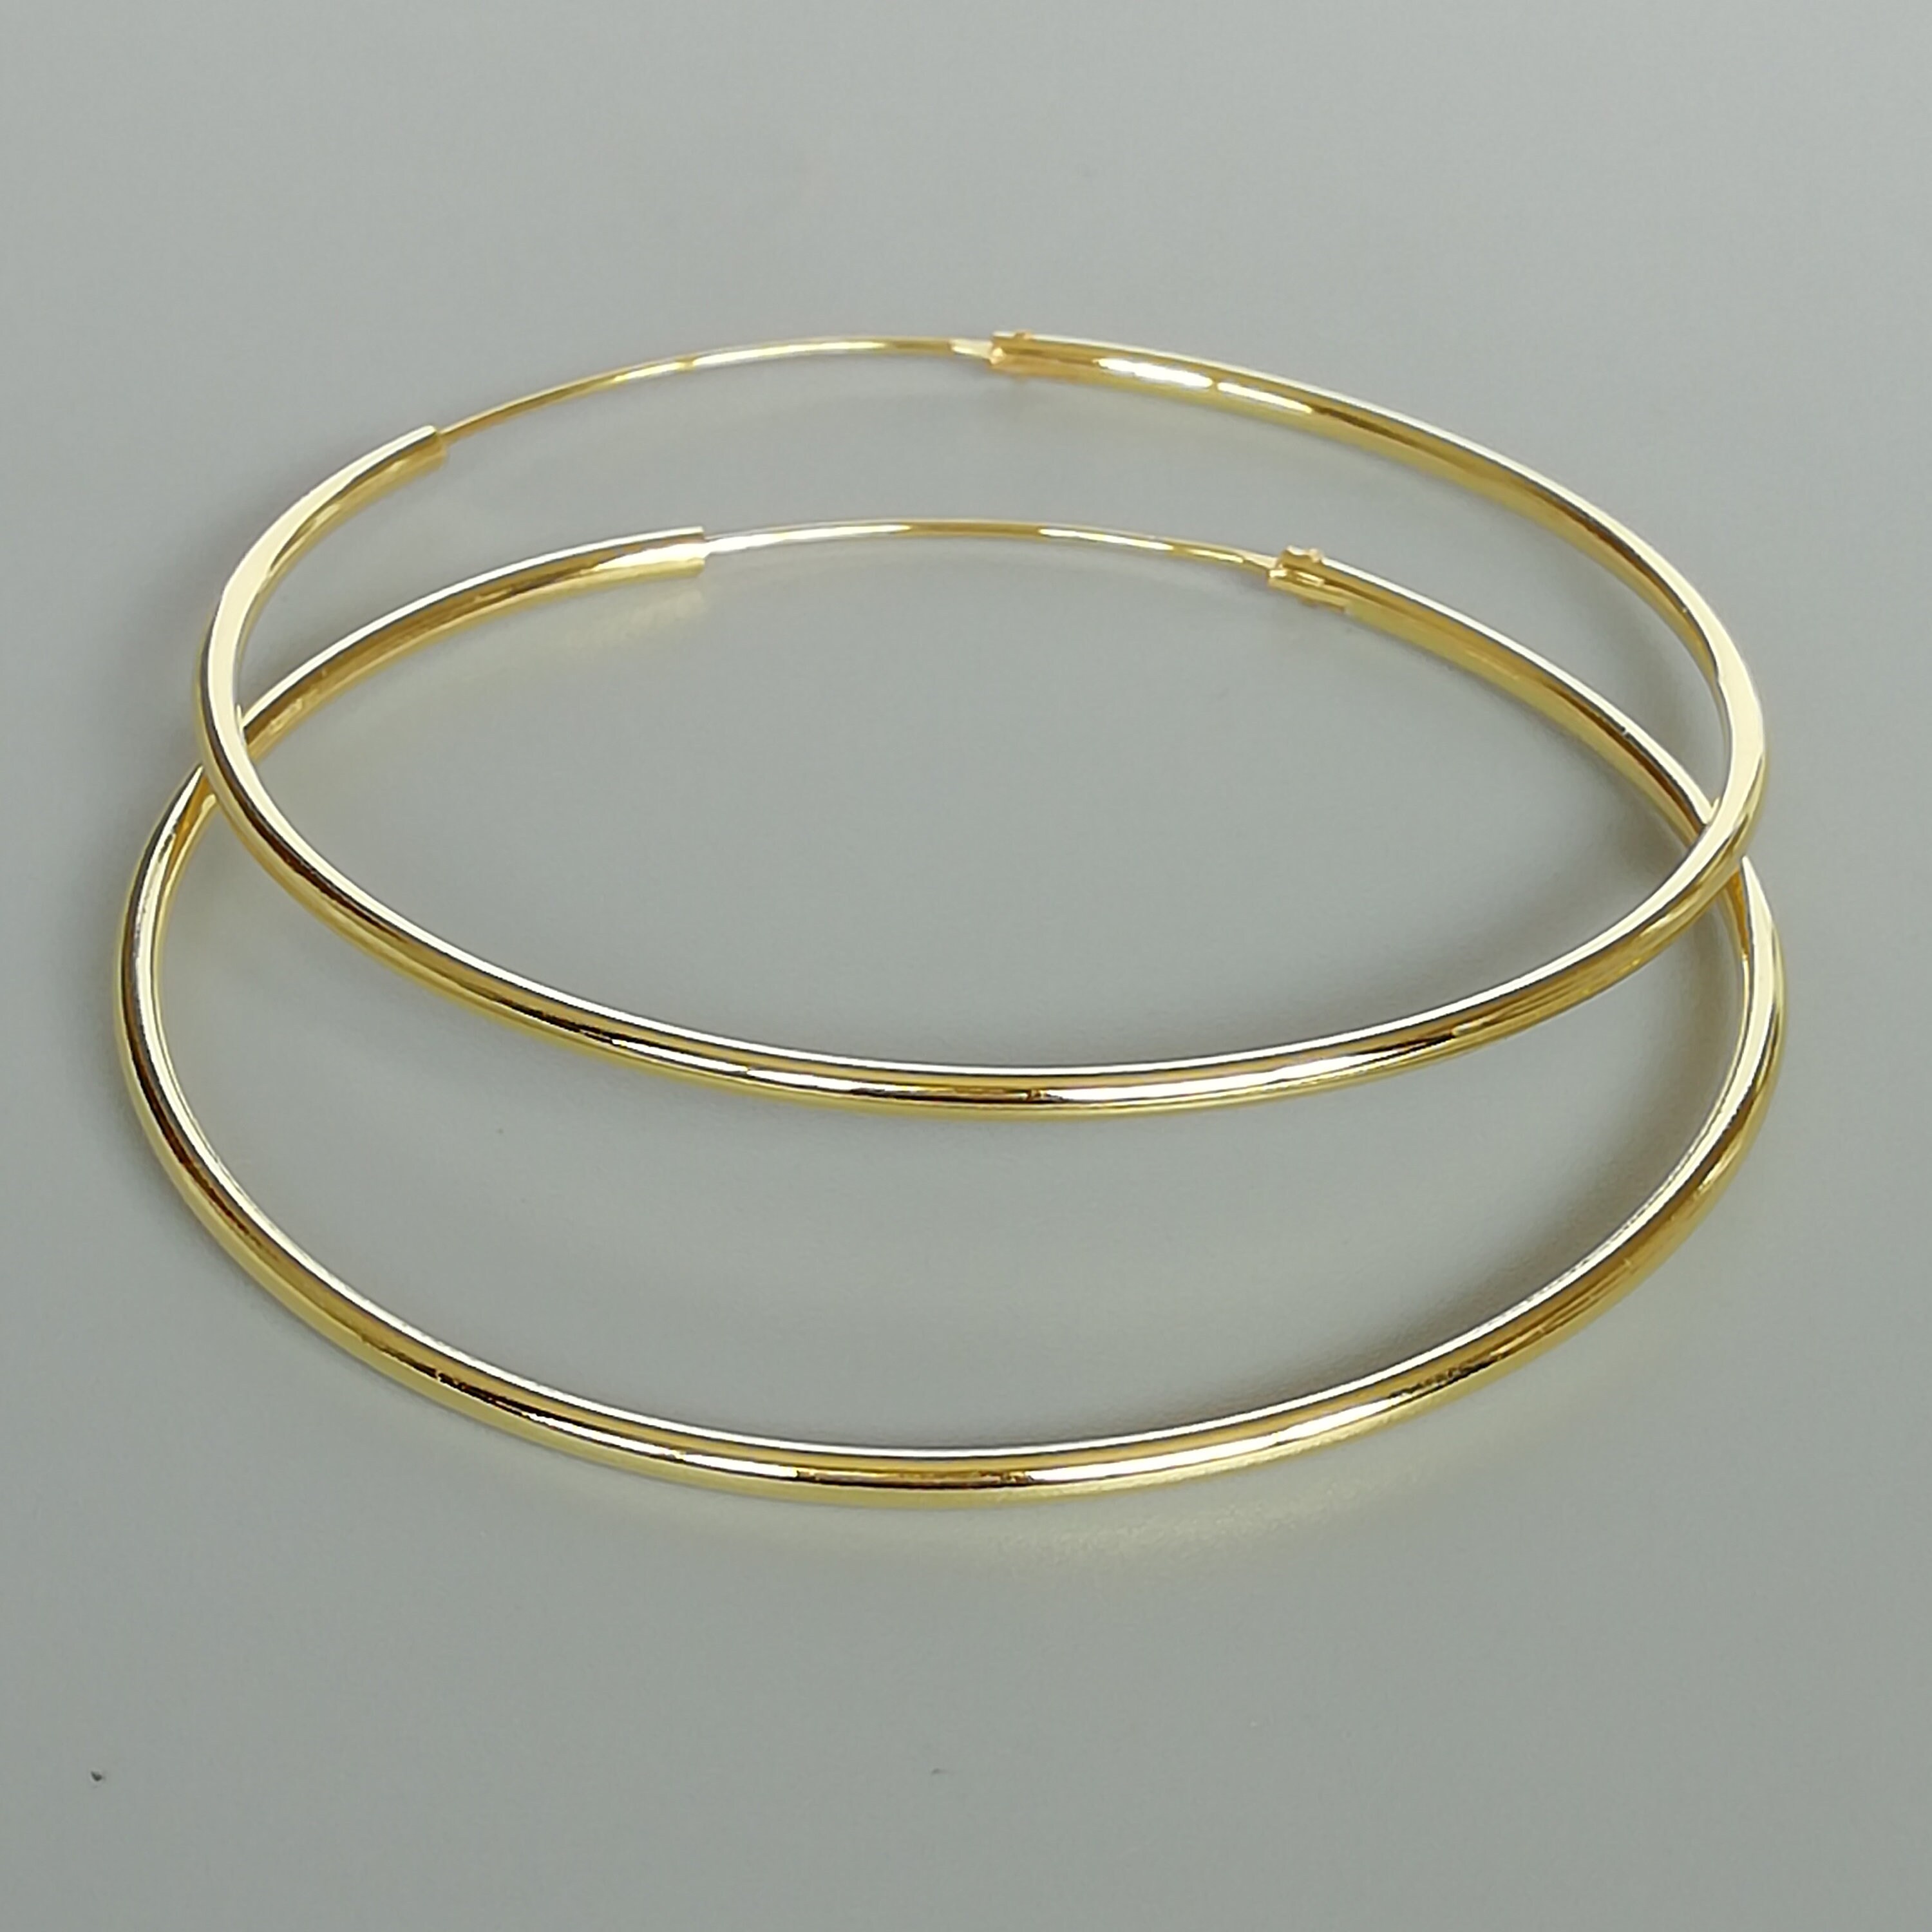 Dramatic Large Gold Hoop Earrings 60 Mm Gold Plated Hoops - Etsy